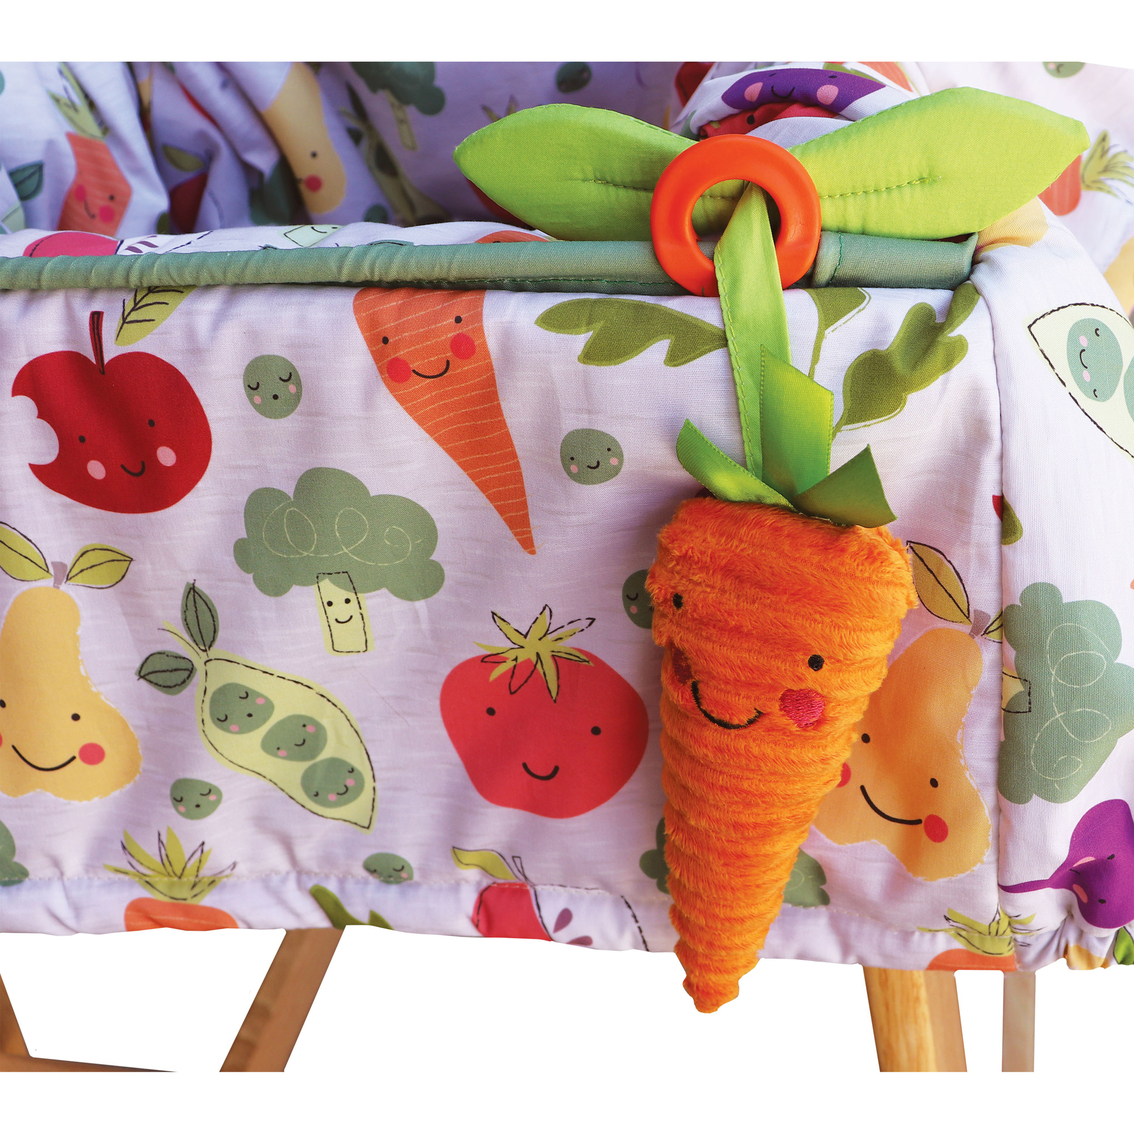 Boppy Farmers Market Shopping Cart Cover - Image 3 of 5